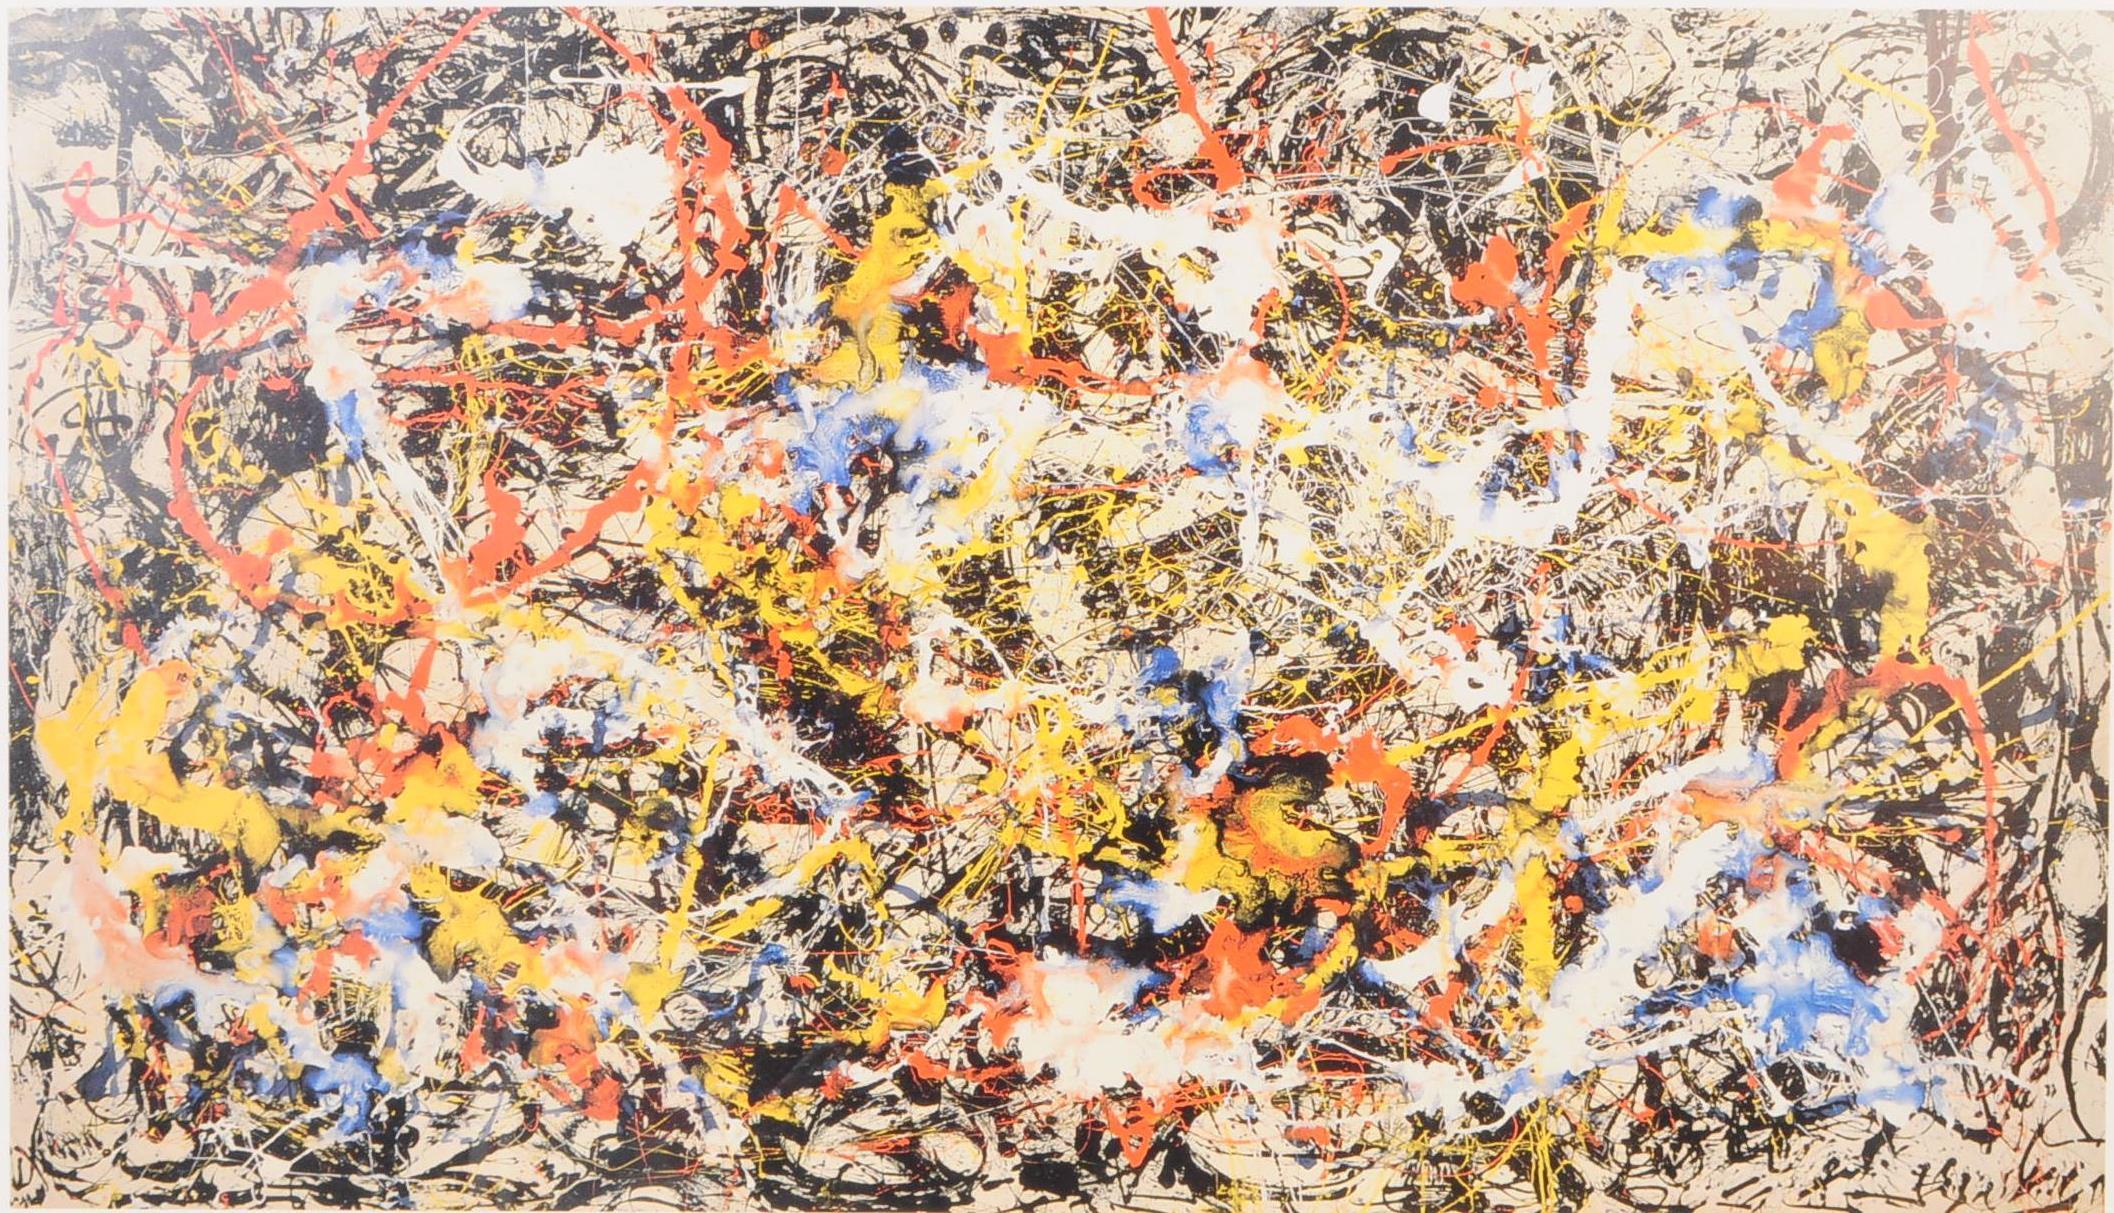 1988 JACKSON POLLOCK ALBRIGHT-KNOX GALLERY POSTER - Image 3 of 8